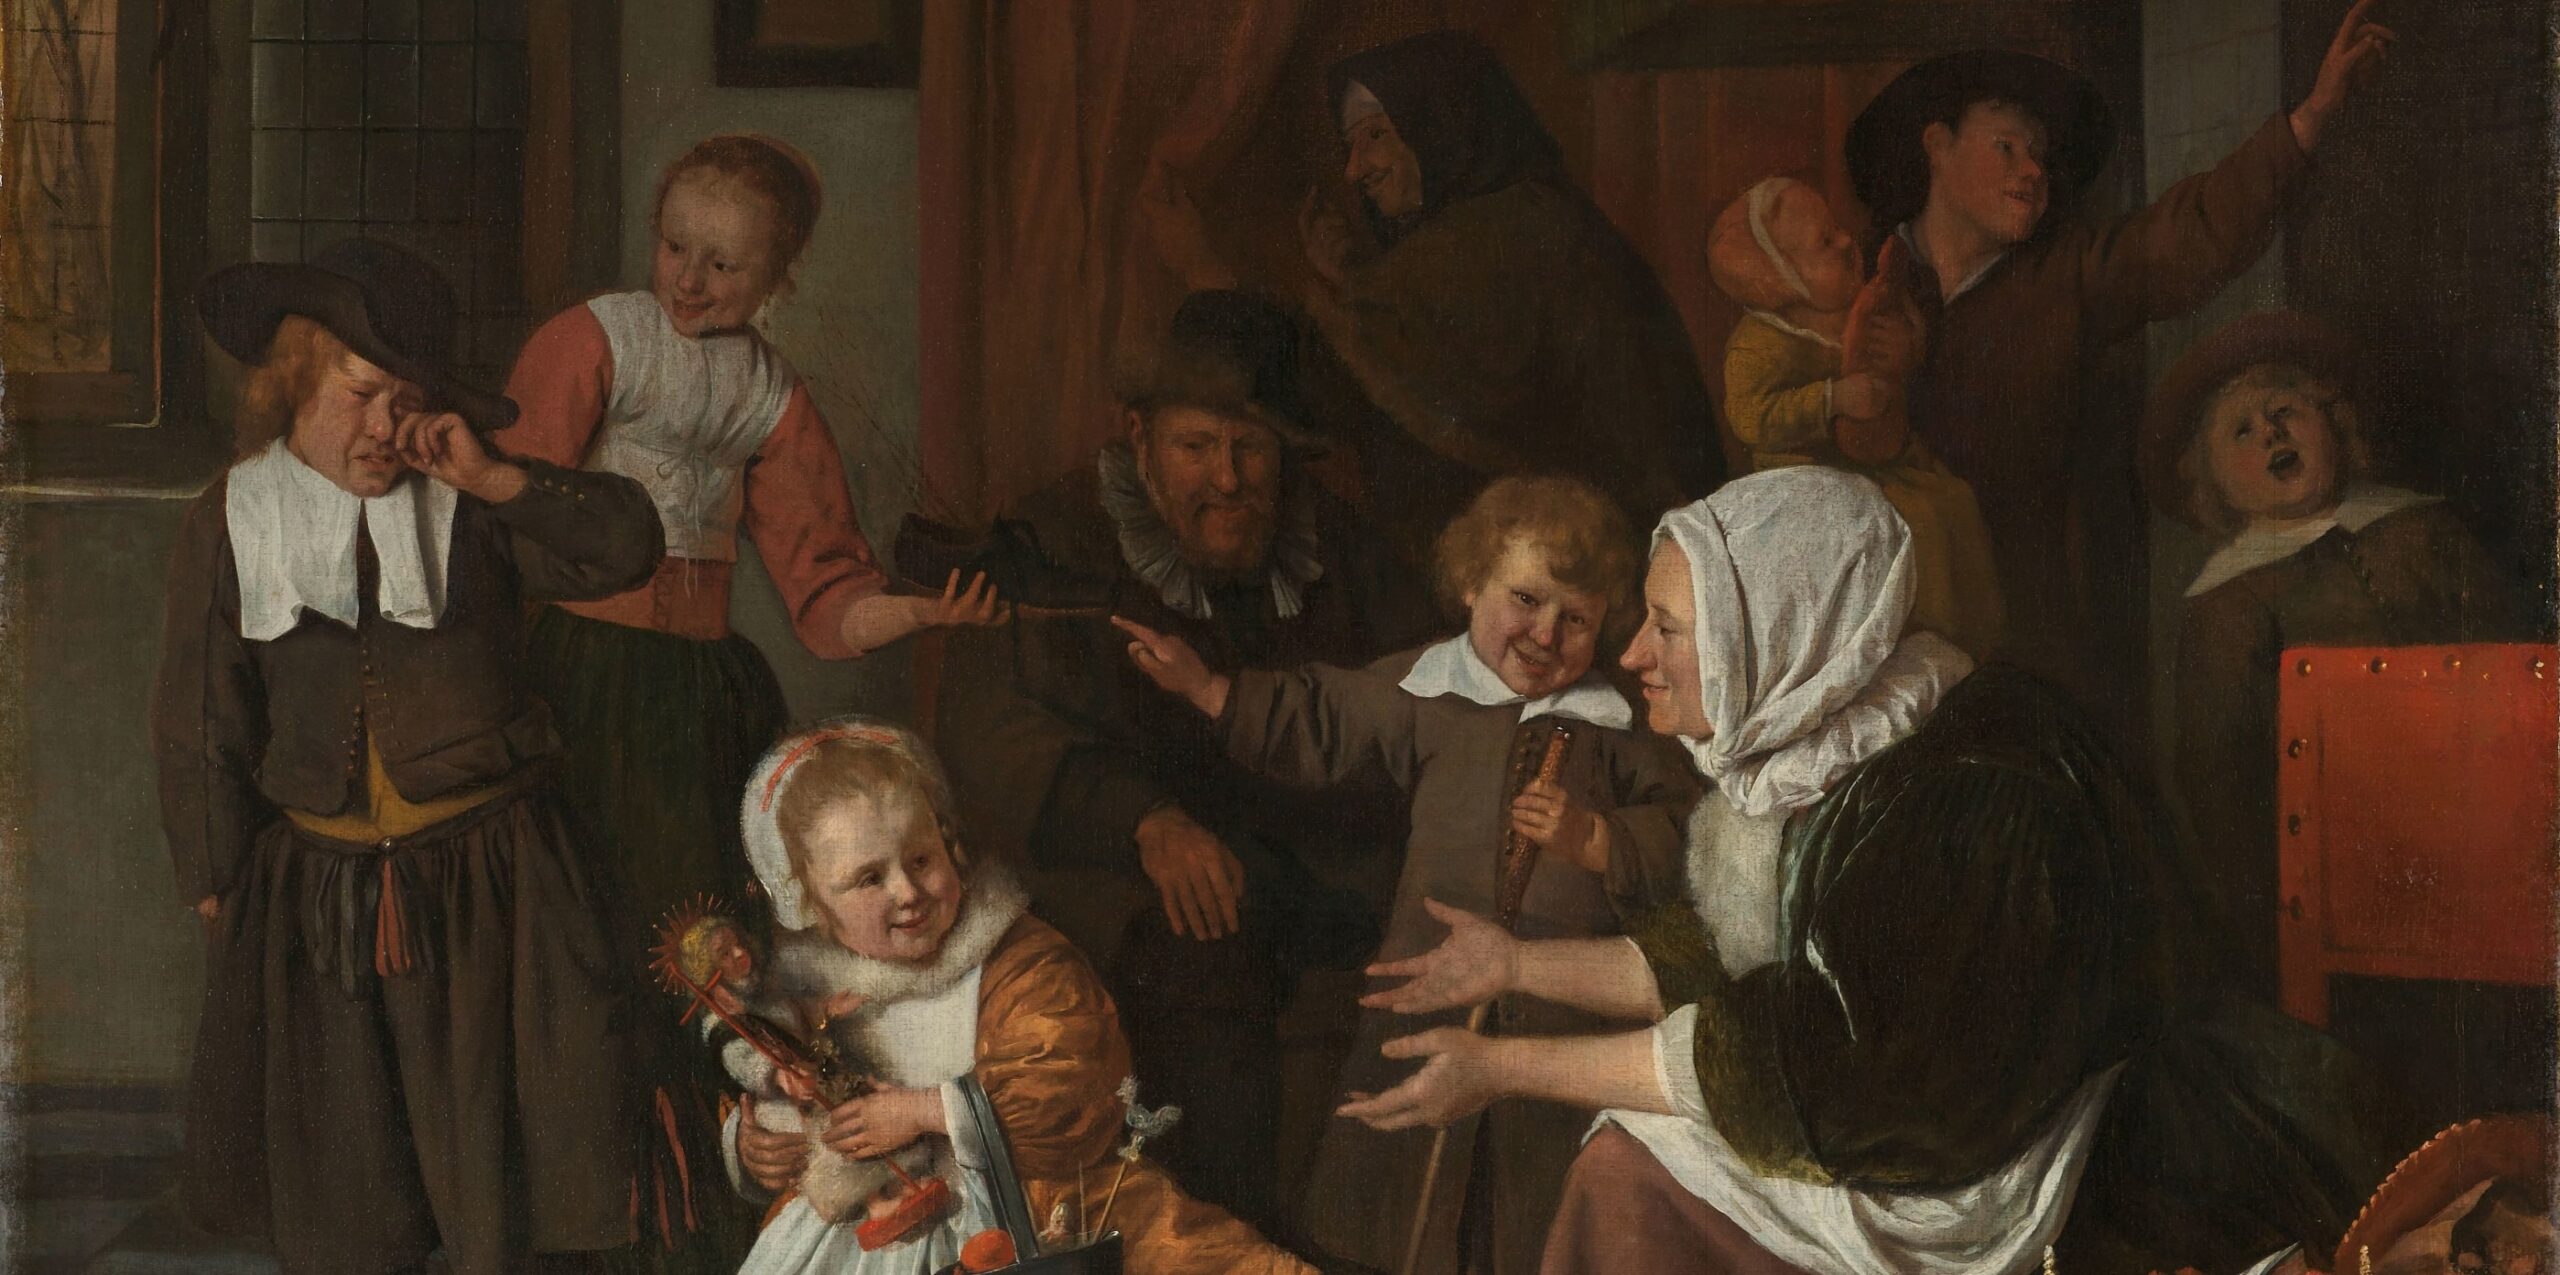 The Feast of St. Nicholas" painting that shows children from the 17th century receiving gifts from Sinterklaas.